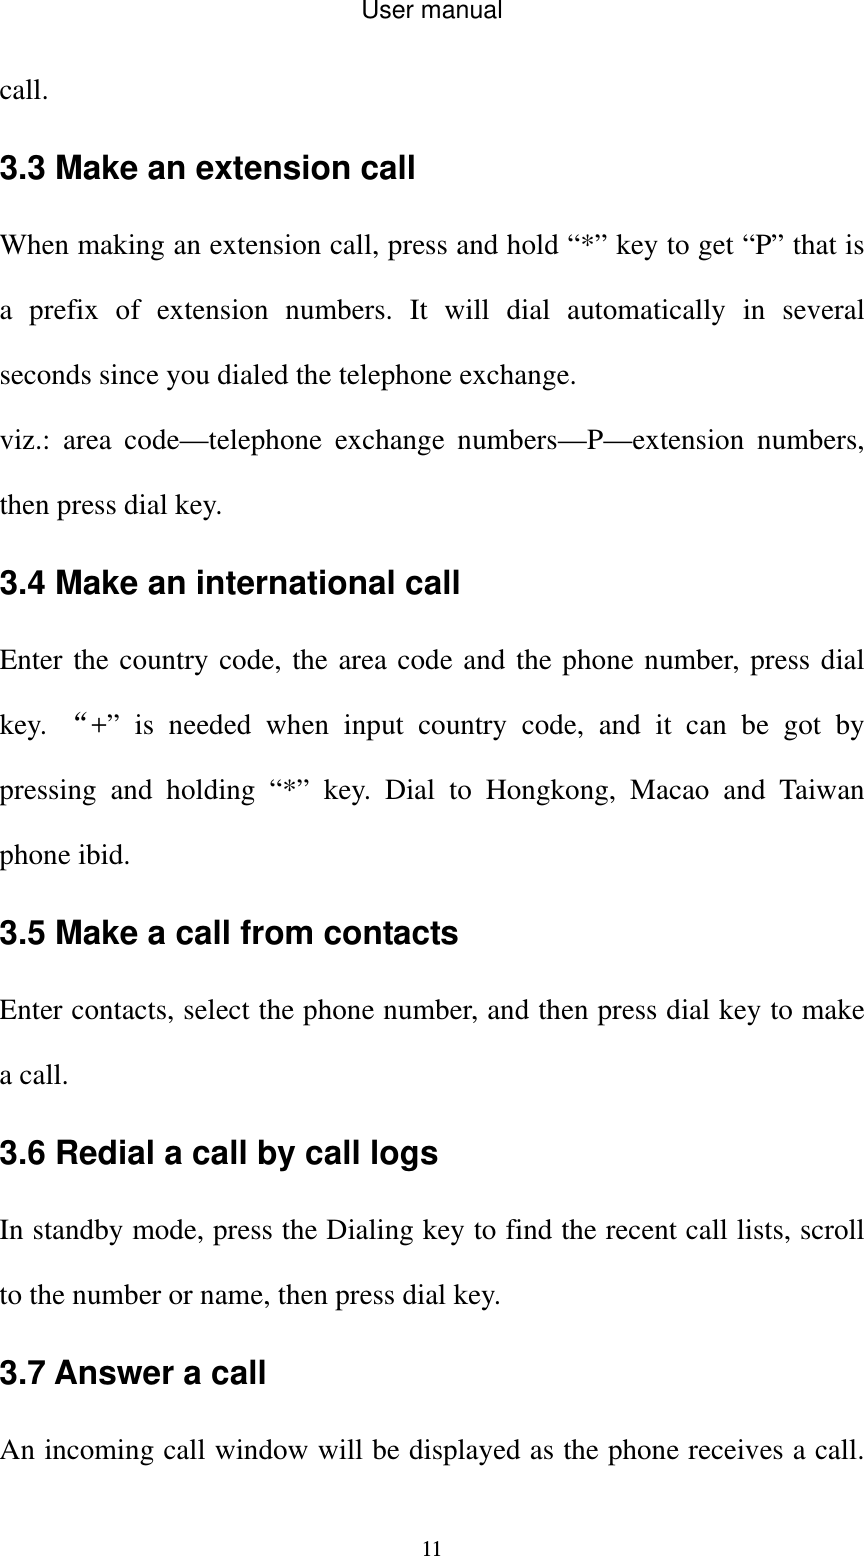 User manual  11call.  3.3 Make an extension call When making an extension call, press and hold “*” key to get “P” that is a prefix of extension numbers. It will dial automatically in several seconds since you dialed the telephone exchange.   viz.: area code—telephone exchange numbers—P—extension numbers, then press dial key. 3.4 Make an international call Enter the country code, the area code and the phone number, press dial key.  “+” is needed when input country code, and it can be got by pressing and holding “*” key. Dial to Hongkong, Macao and Taiwan phone ibid. 3.5 Make a call from contacts Enter contacts, select the phone number, and then press dial key to make a call. 3.6 Redial a call by call logs In standby mode, press the Dialing key to find the recent call lists, scroll to the number or name, then press dial key. 3.7 Answer a call An incoming call window will be displayed as the phone receives a call. 